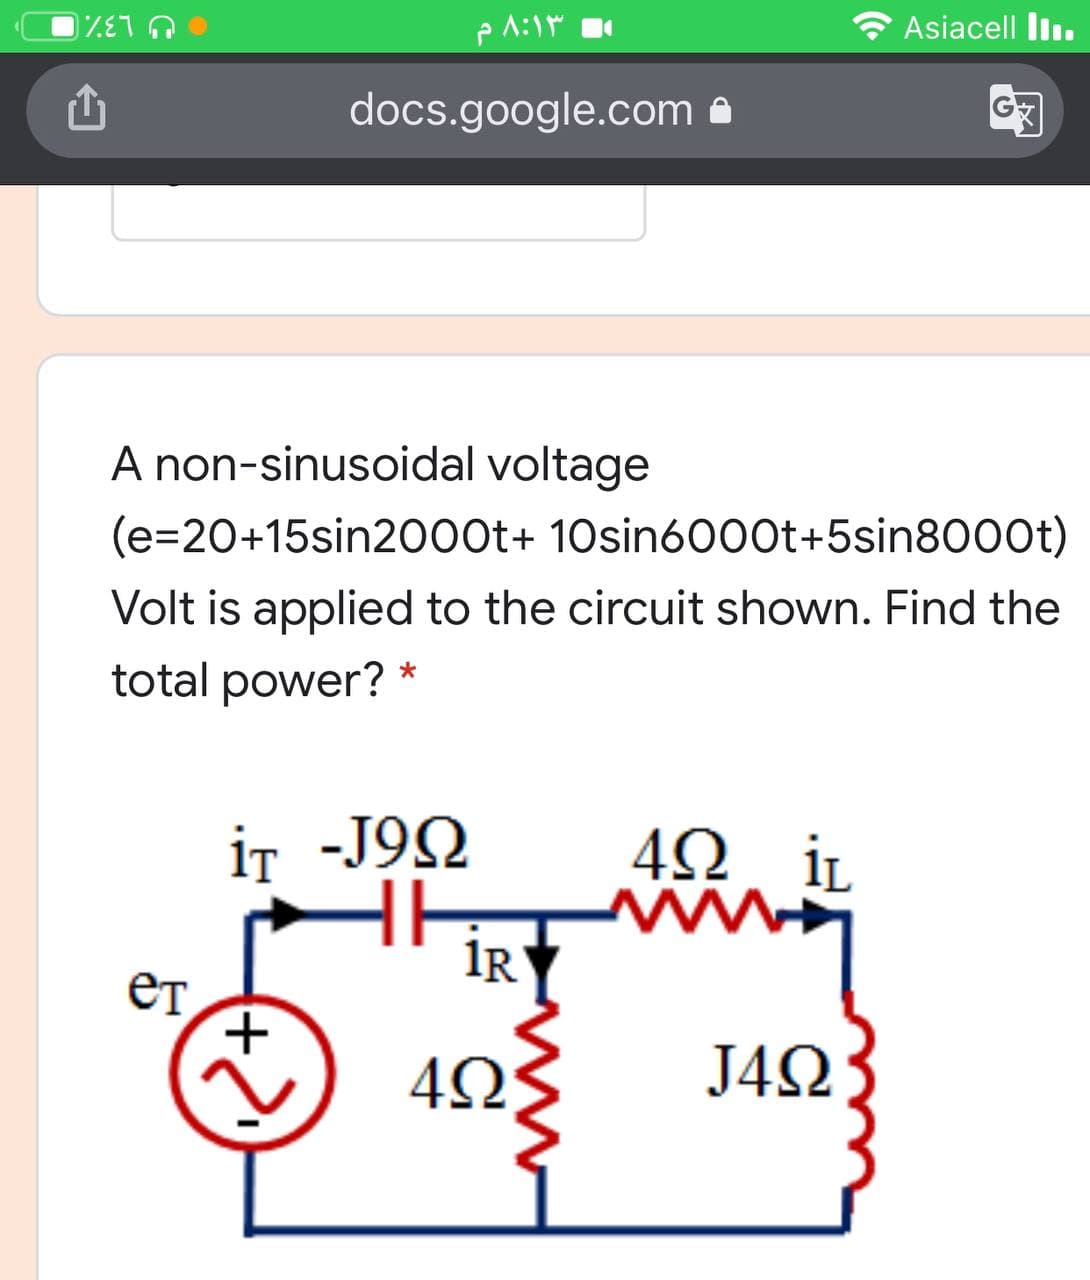 Asiacell l.
U L3%
docs.google.com
A non-sinusoidal voltage
(e=20+15sin2000t+ 10sin6000t+5sin8000t)
Volt is applied to the circuit shown. Find the
total power? *
iT -J9Q
4Ω, iL
IR
ет
J4Ω
(+)
